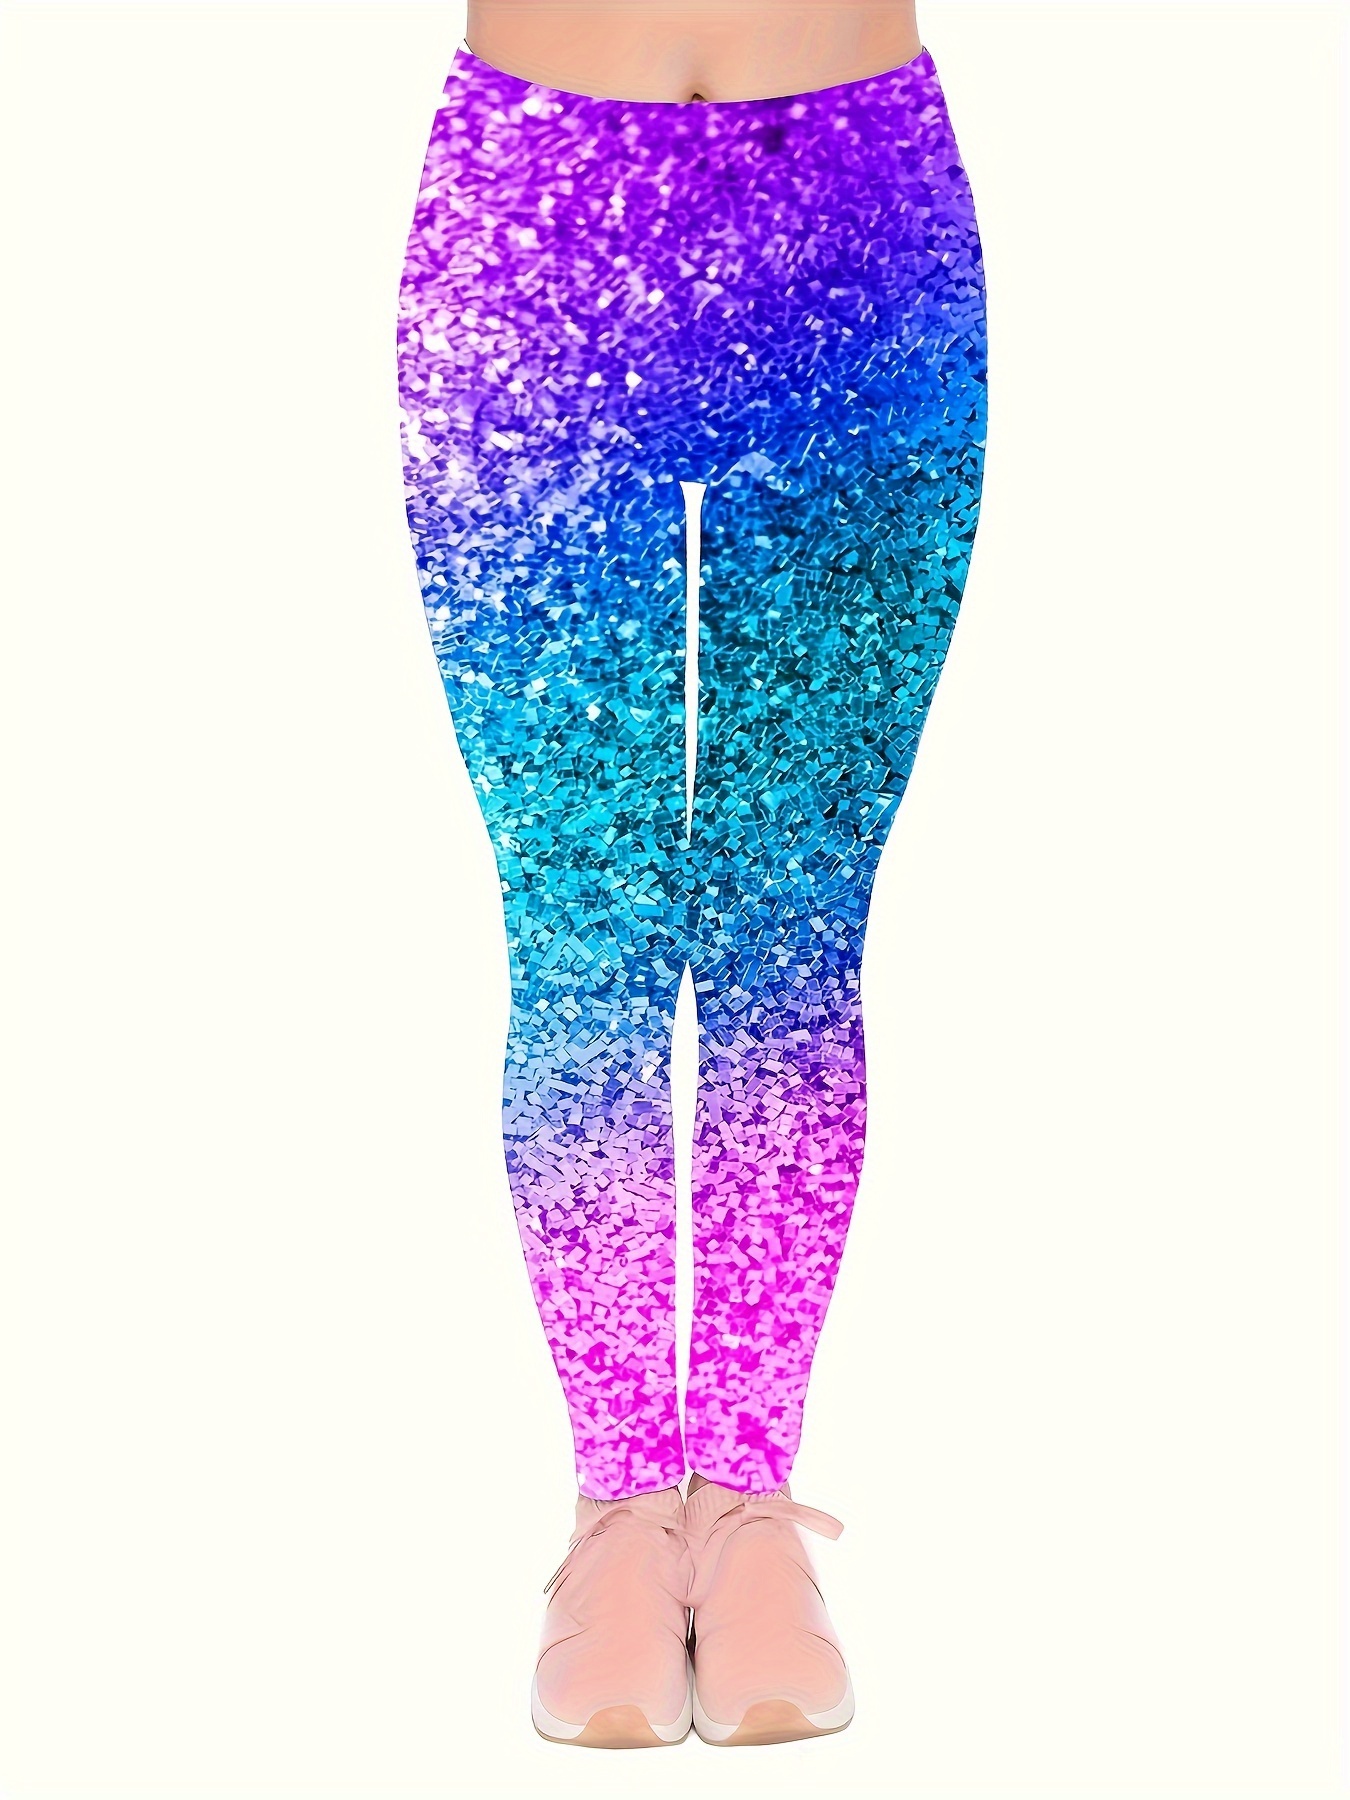 Women's Skinny Pants Shiny Sequin Party Stretchy Leggings Sparkle